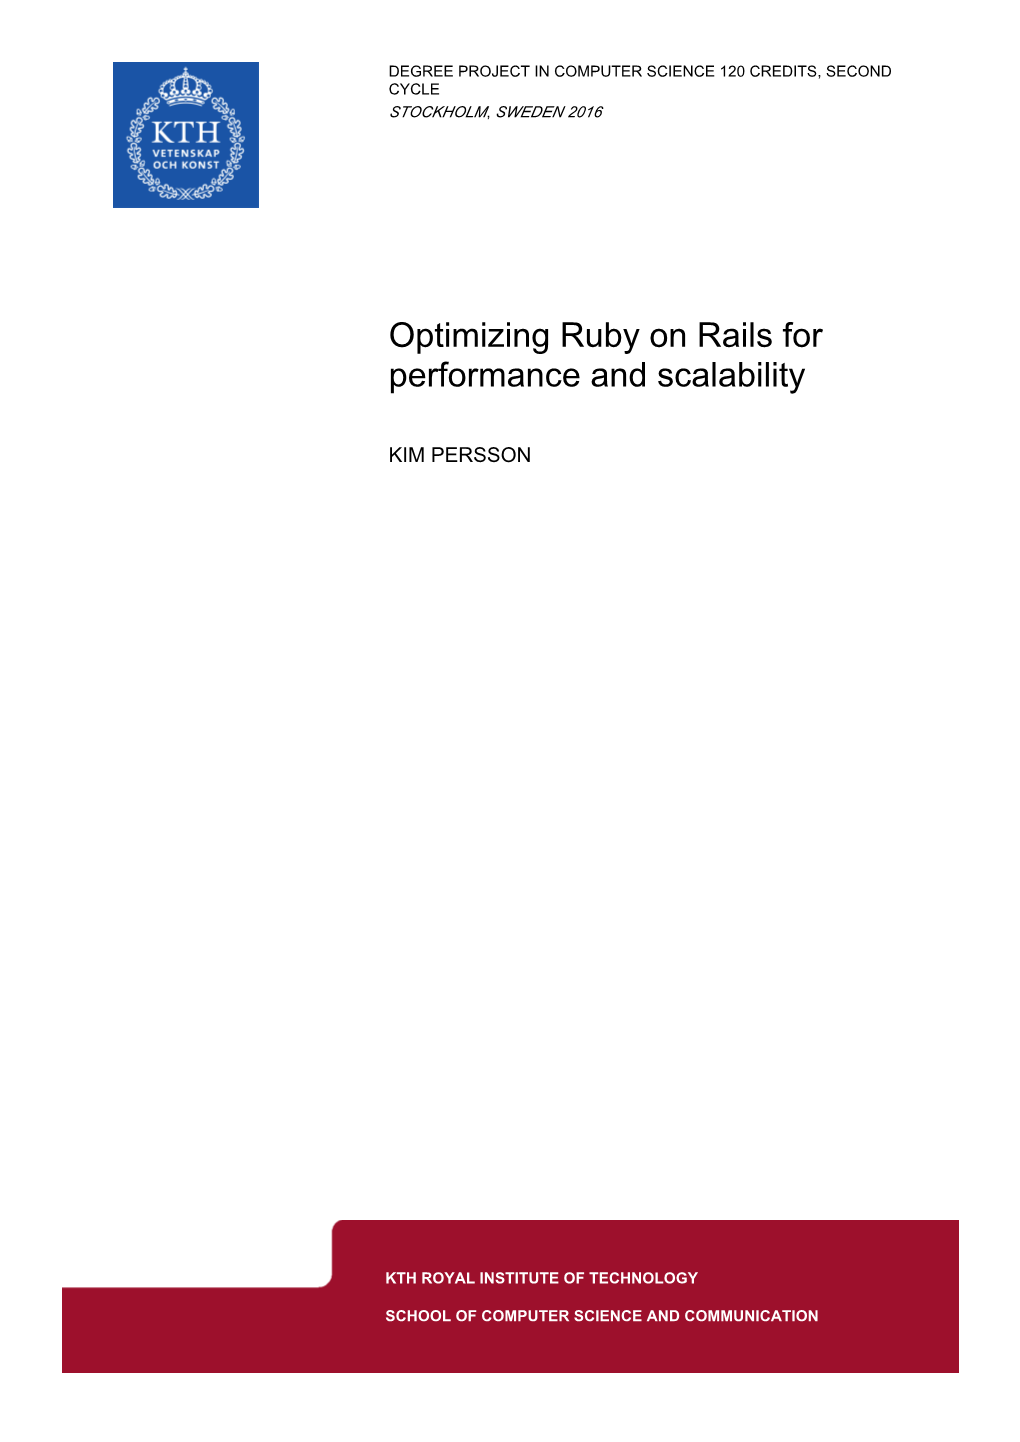 Optimizing Ruby on Rails for Performance and Scalability